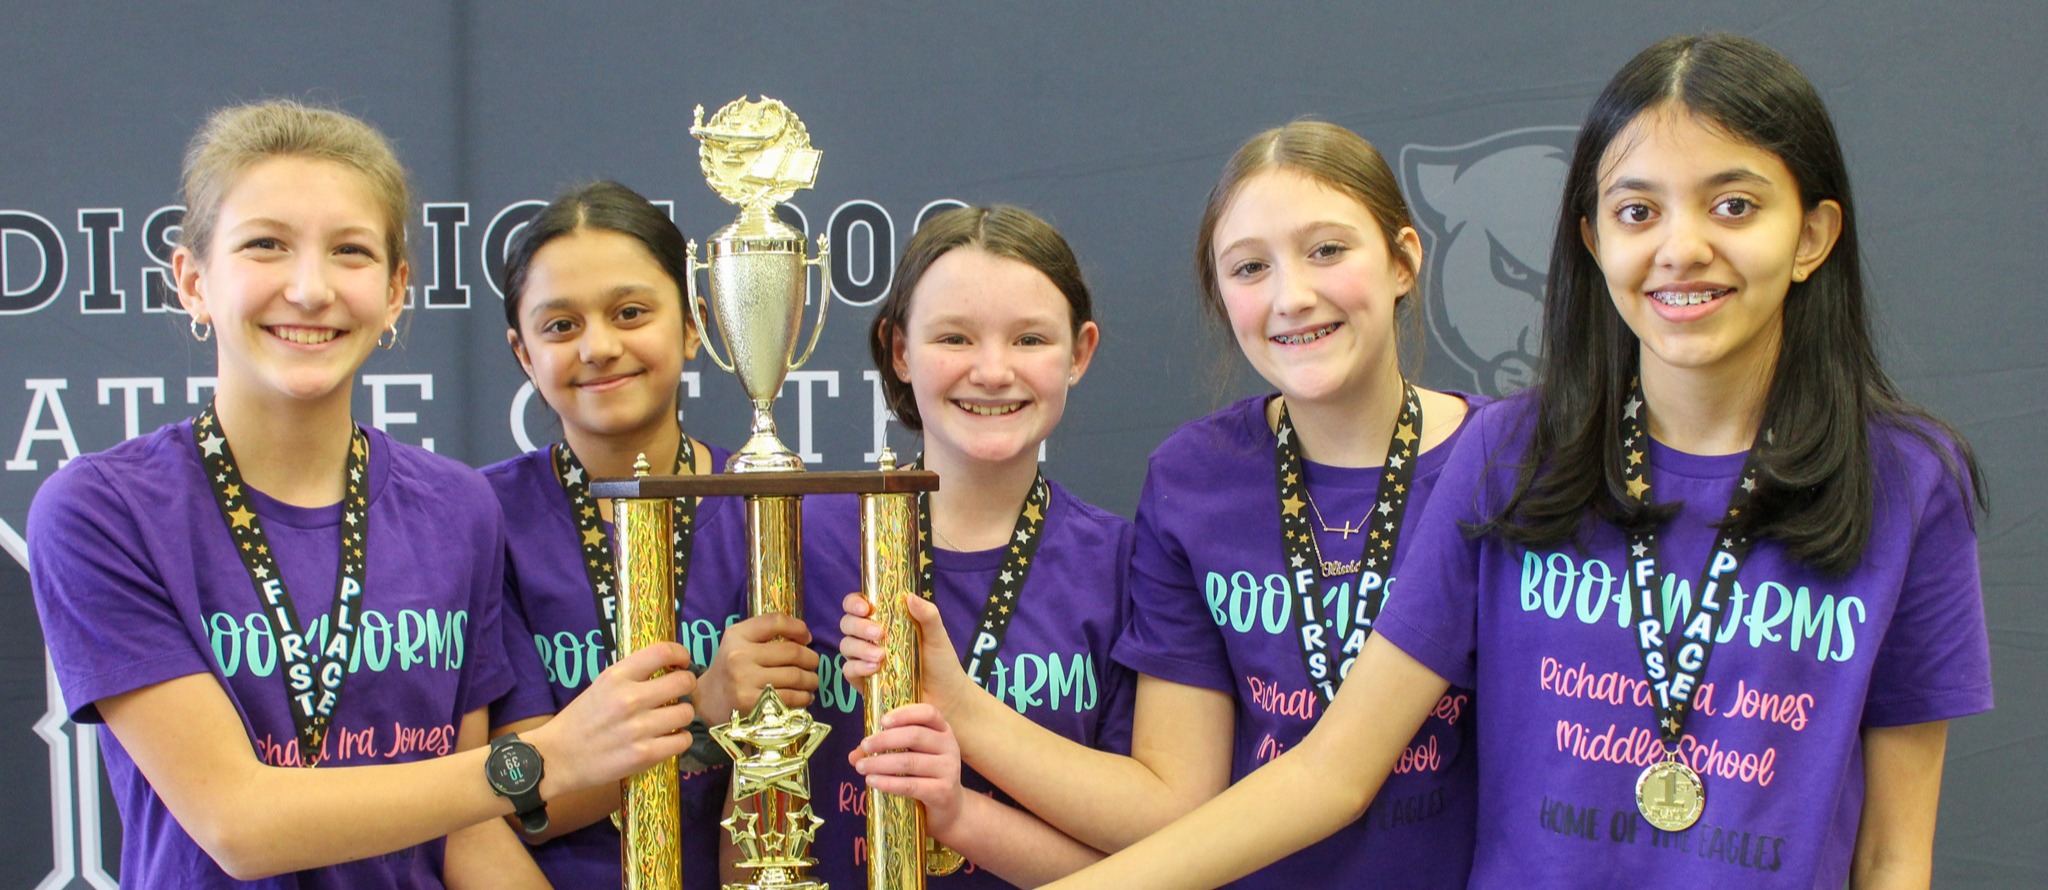 four girls hold battle of the books trophy